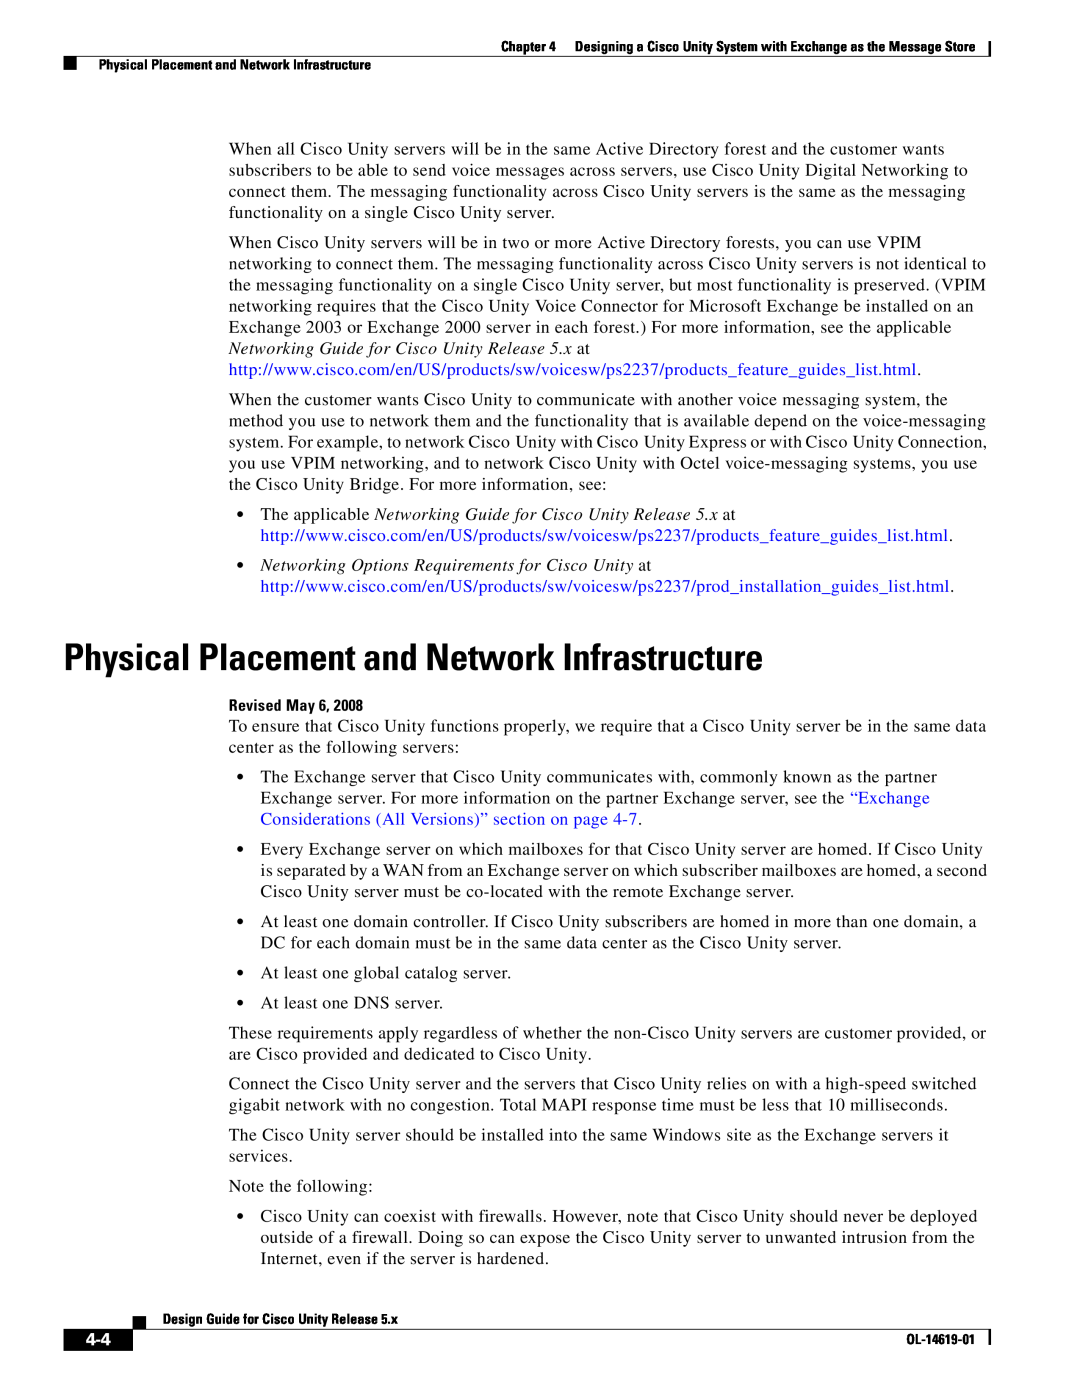 Cisco Systems OL-14619-01 manual Physical Placement and Network Infrastructure 